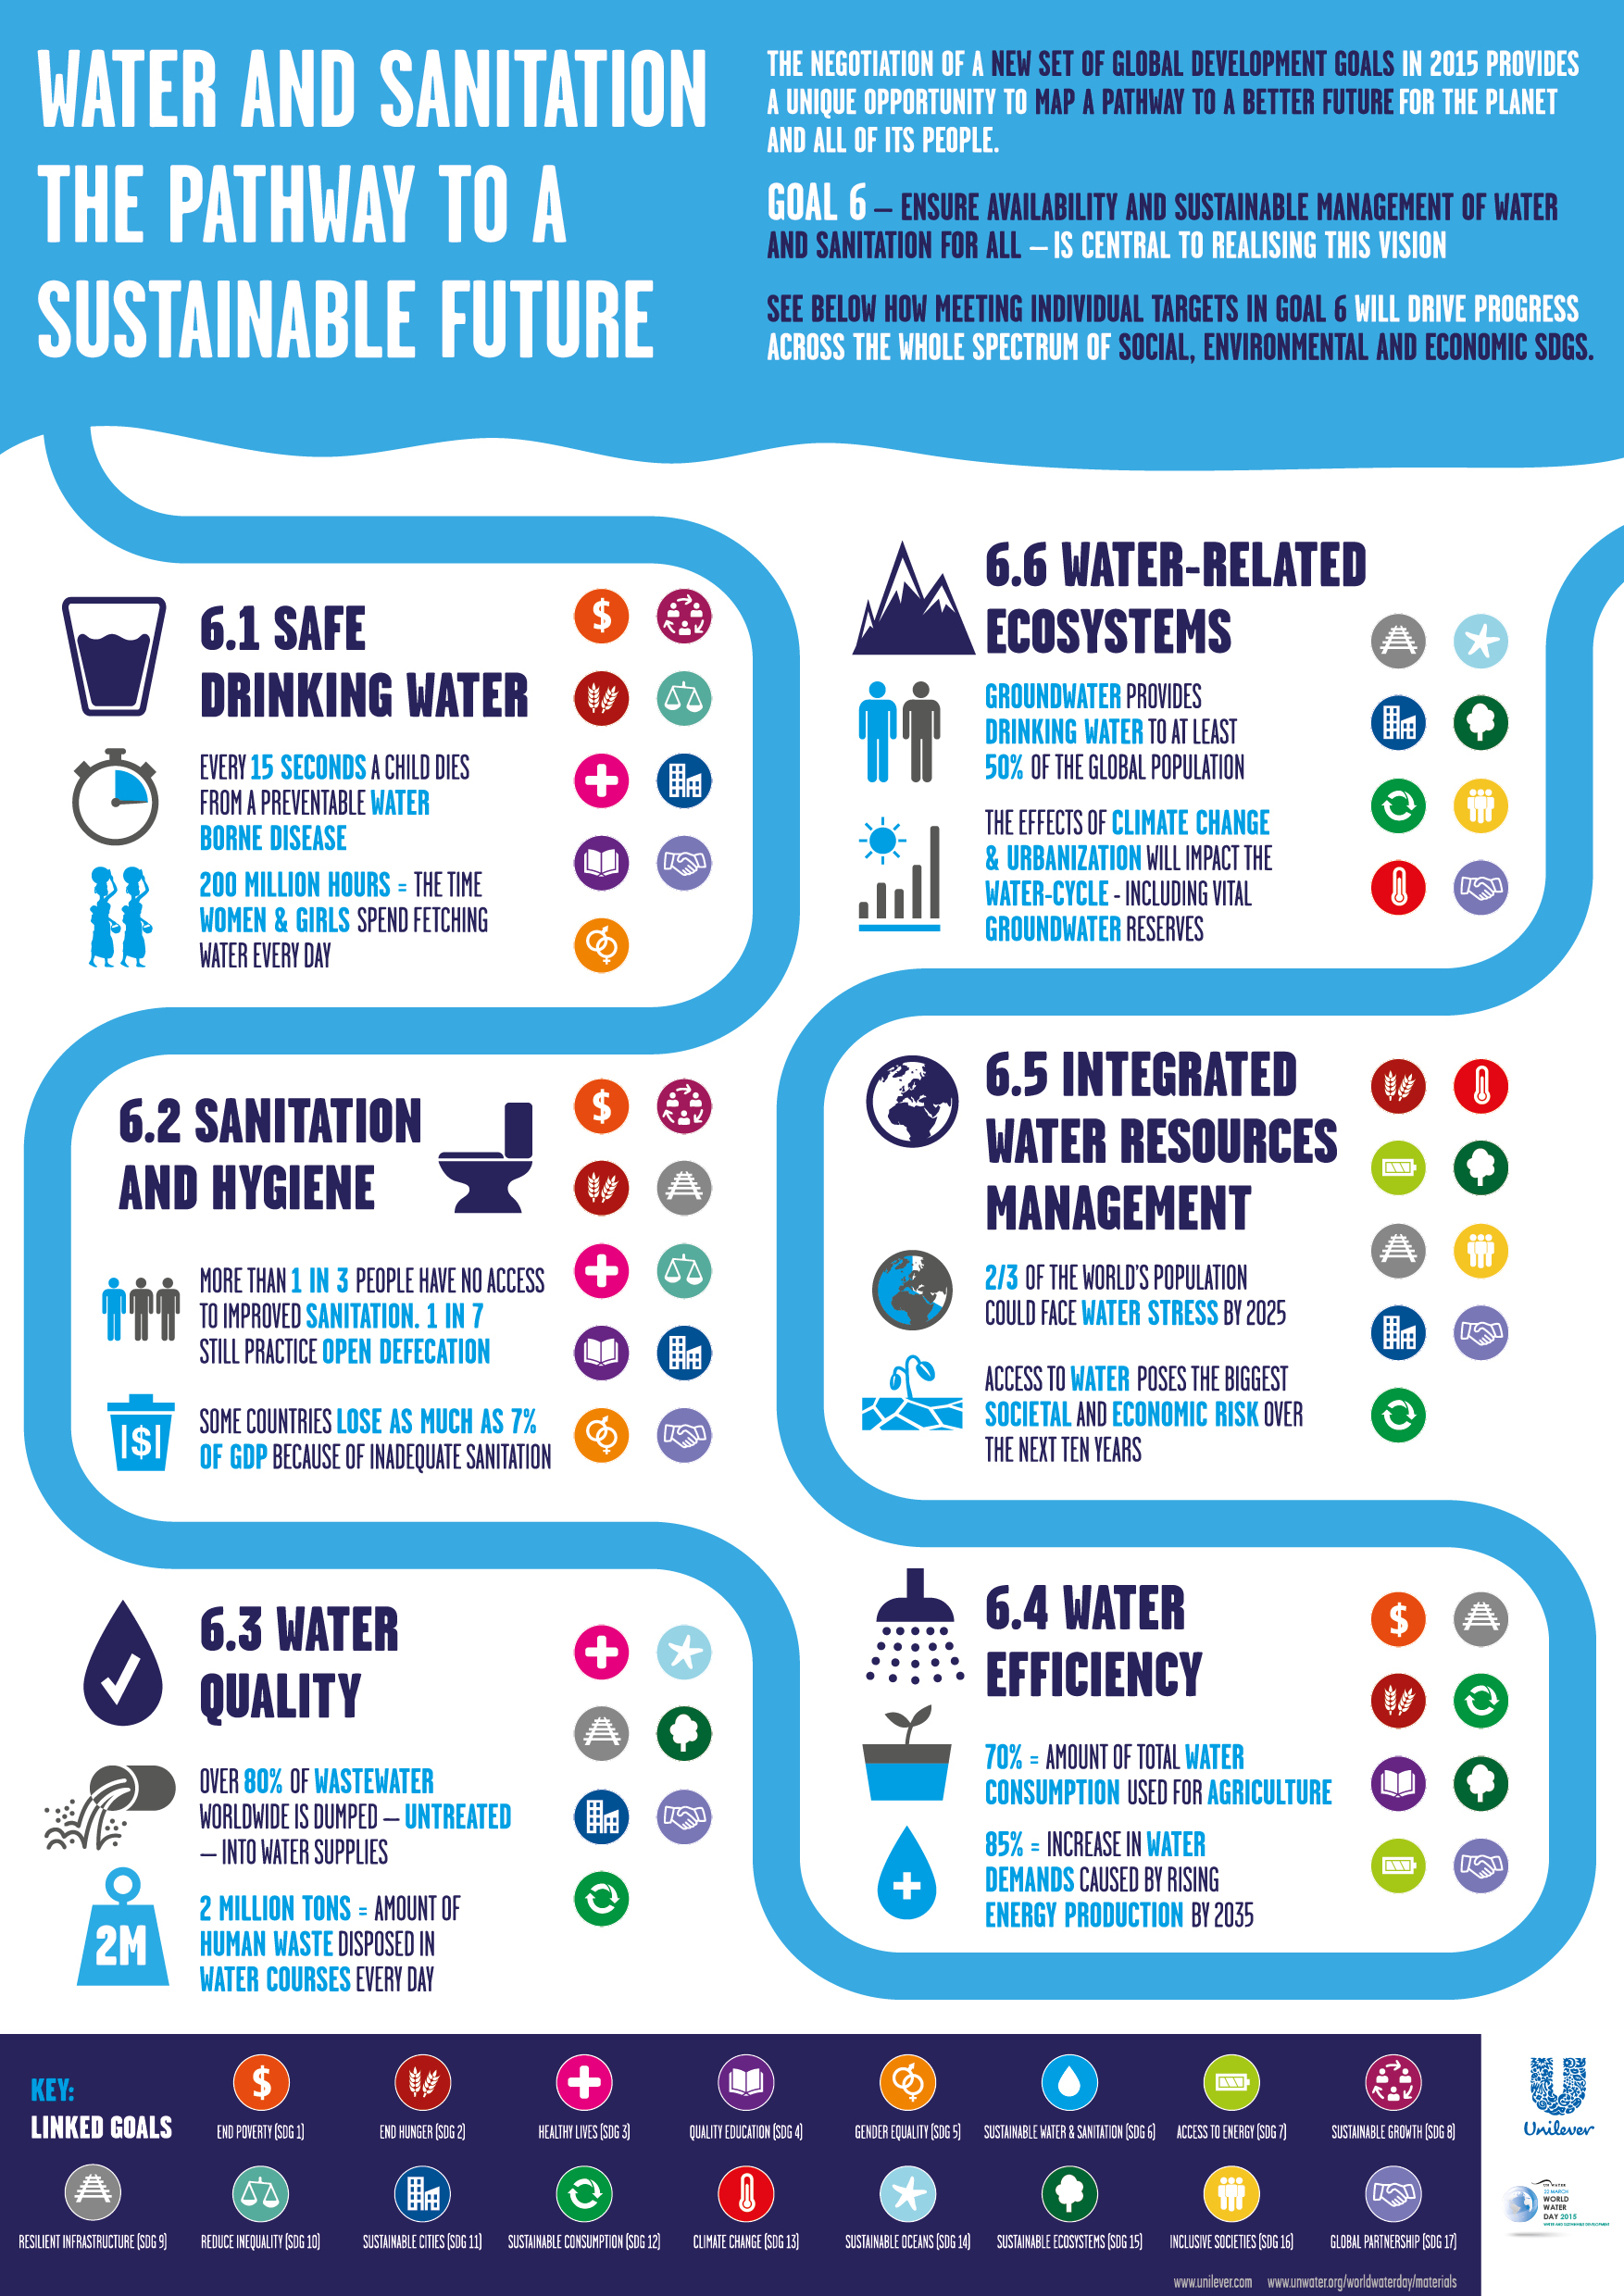 Unilever Releases Infographics to Demonstrate the Interlinkages Between Water and Sanitation